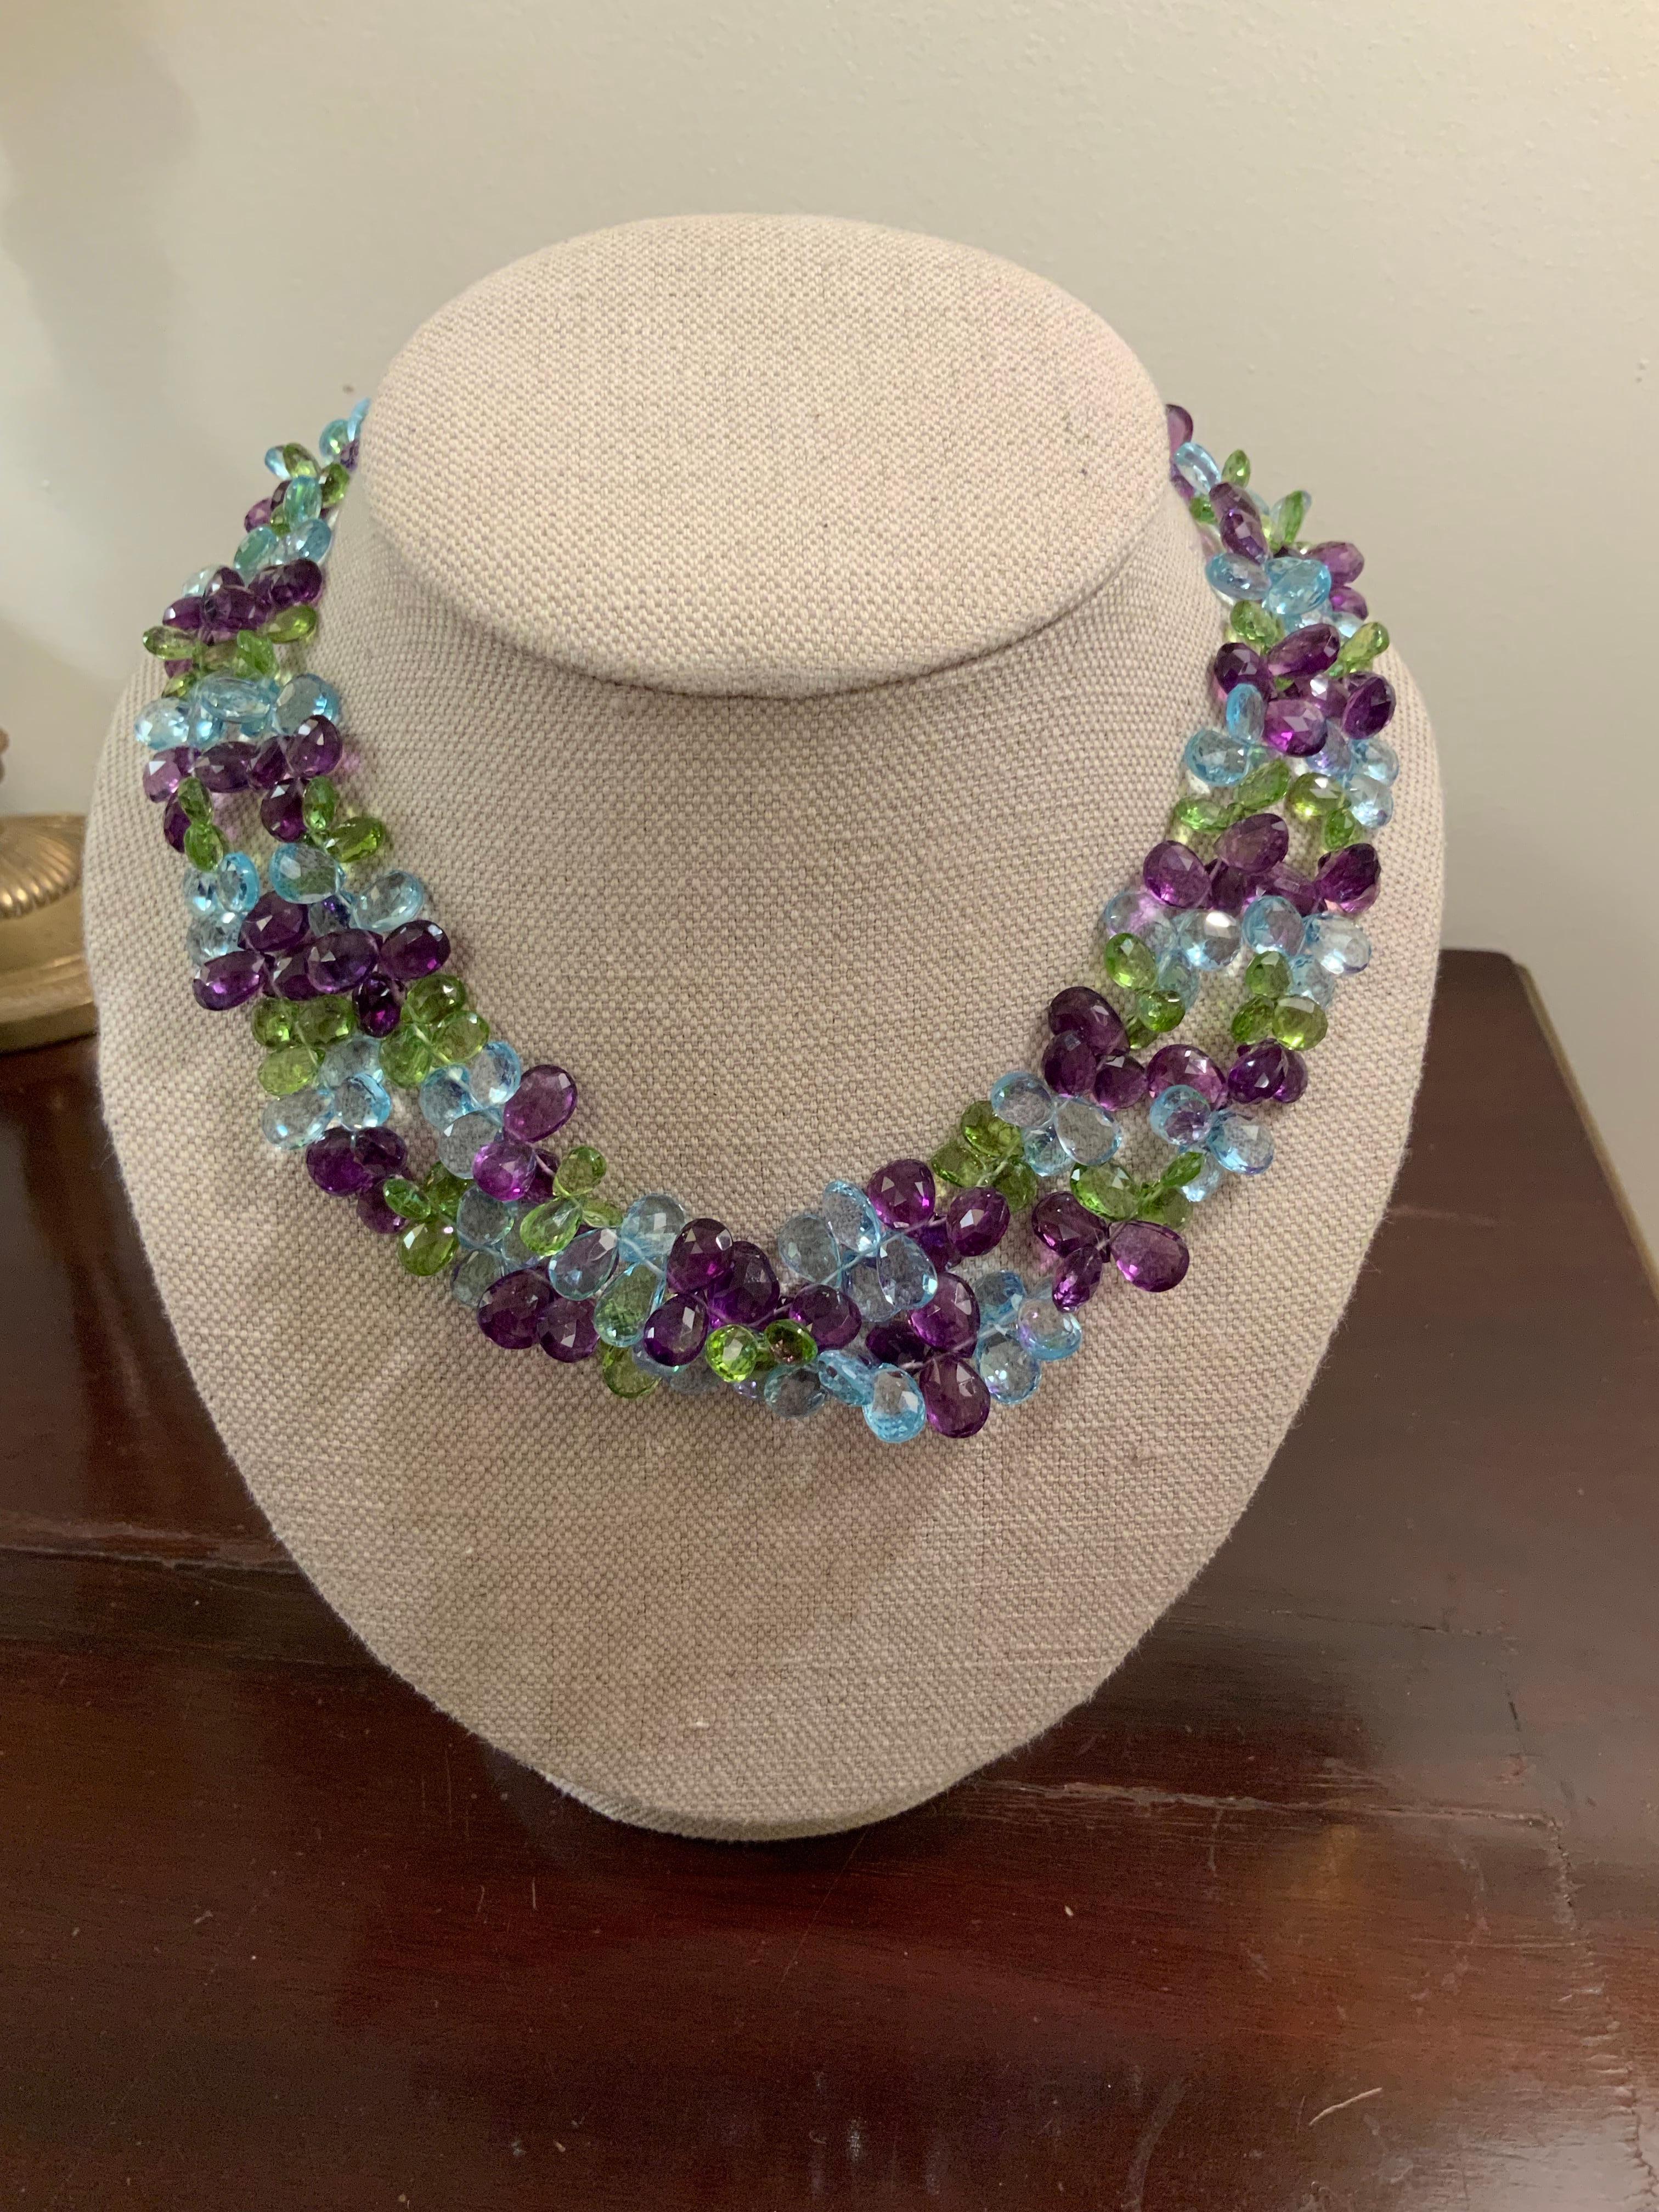 Elegant 2 strand faceted pear shaped Briolette Necklace with Blue Topaz, Peridot and Amethyst finished with 18kt White Gold Clasp.  The faceted flat briolettes weigh approximately 520 carats.

The Necklace measure 17 inches when twisted